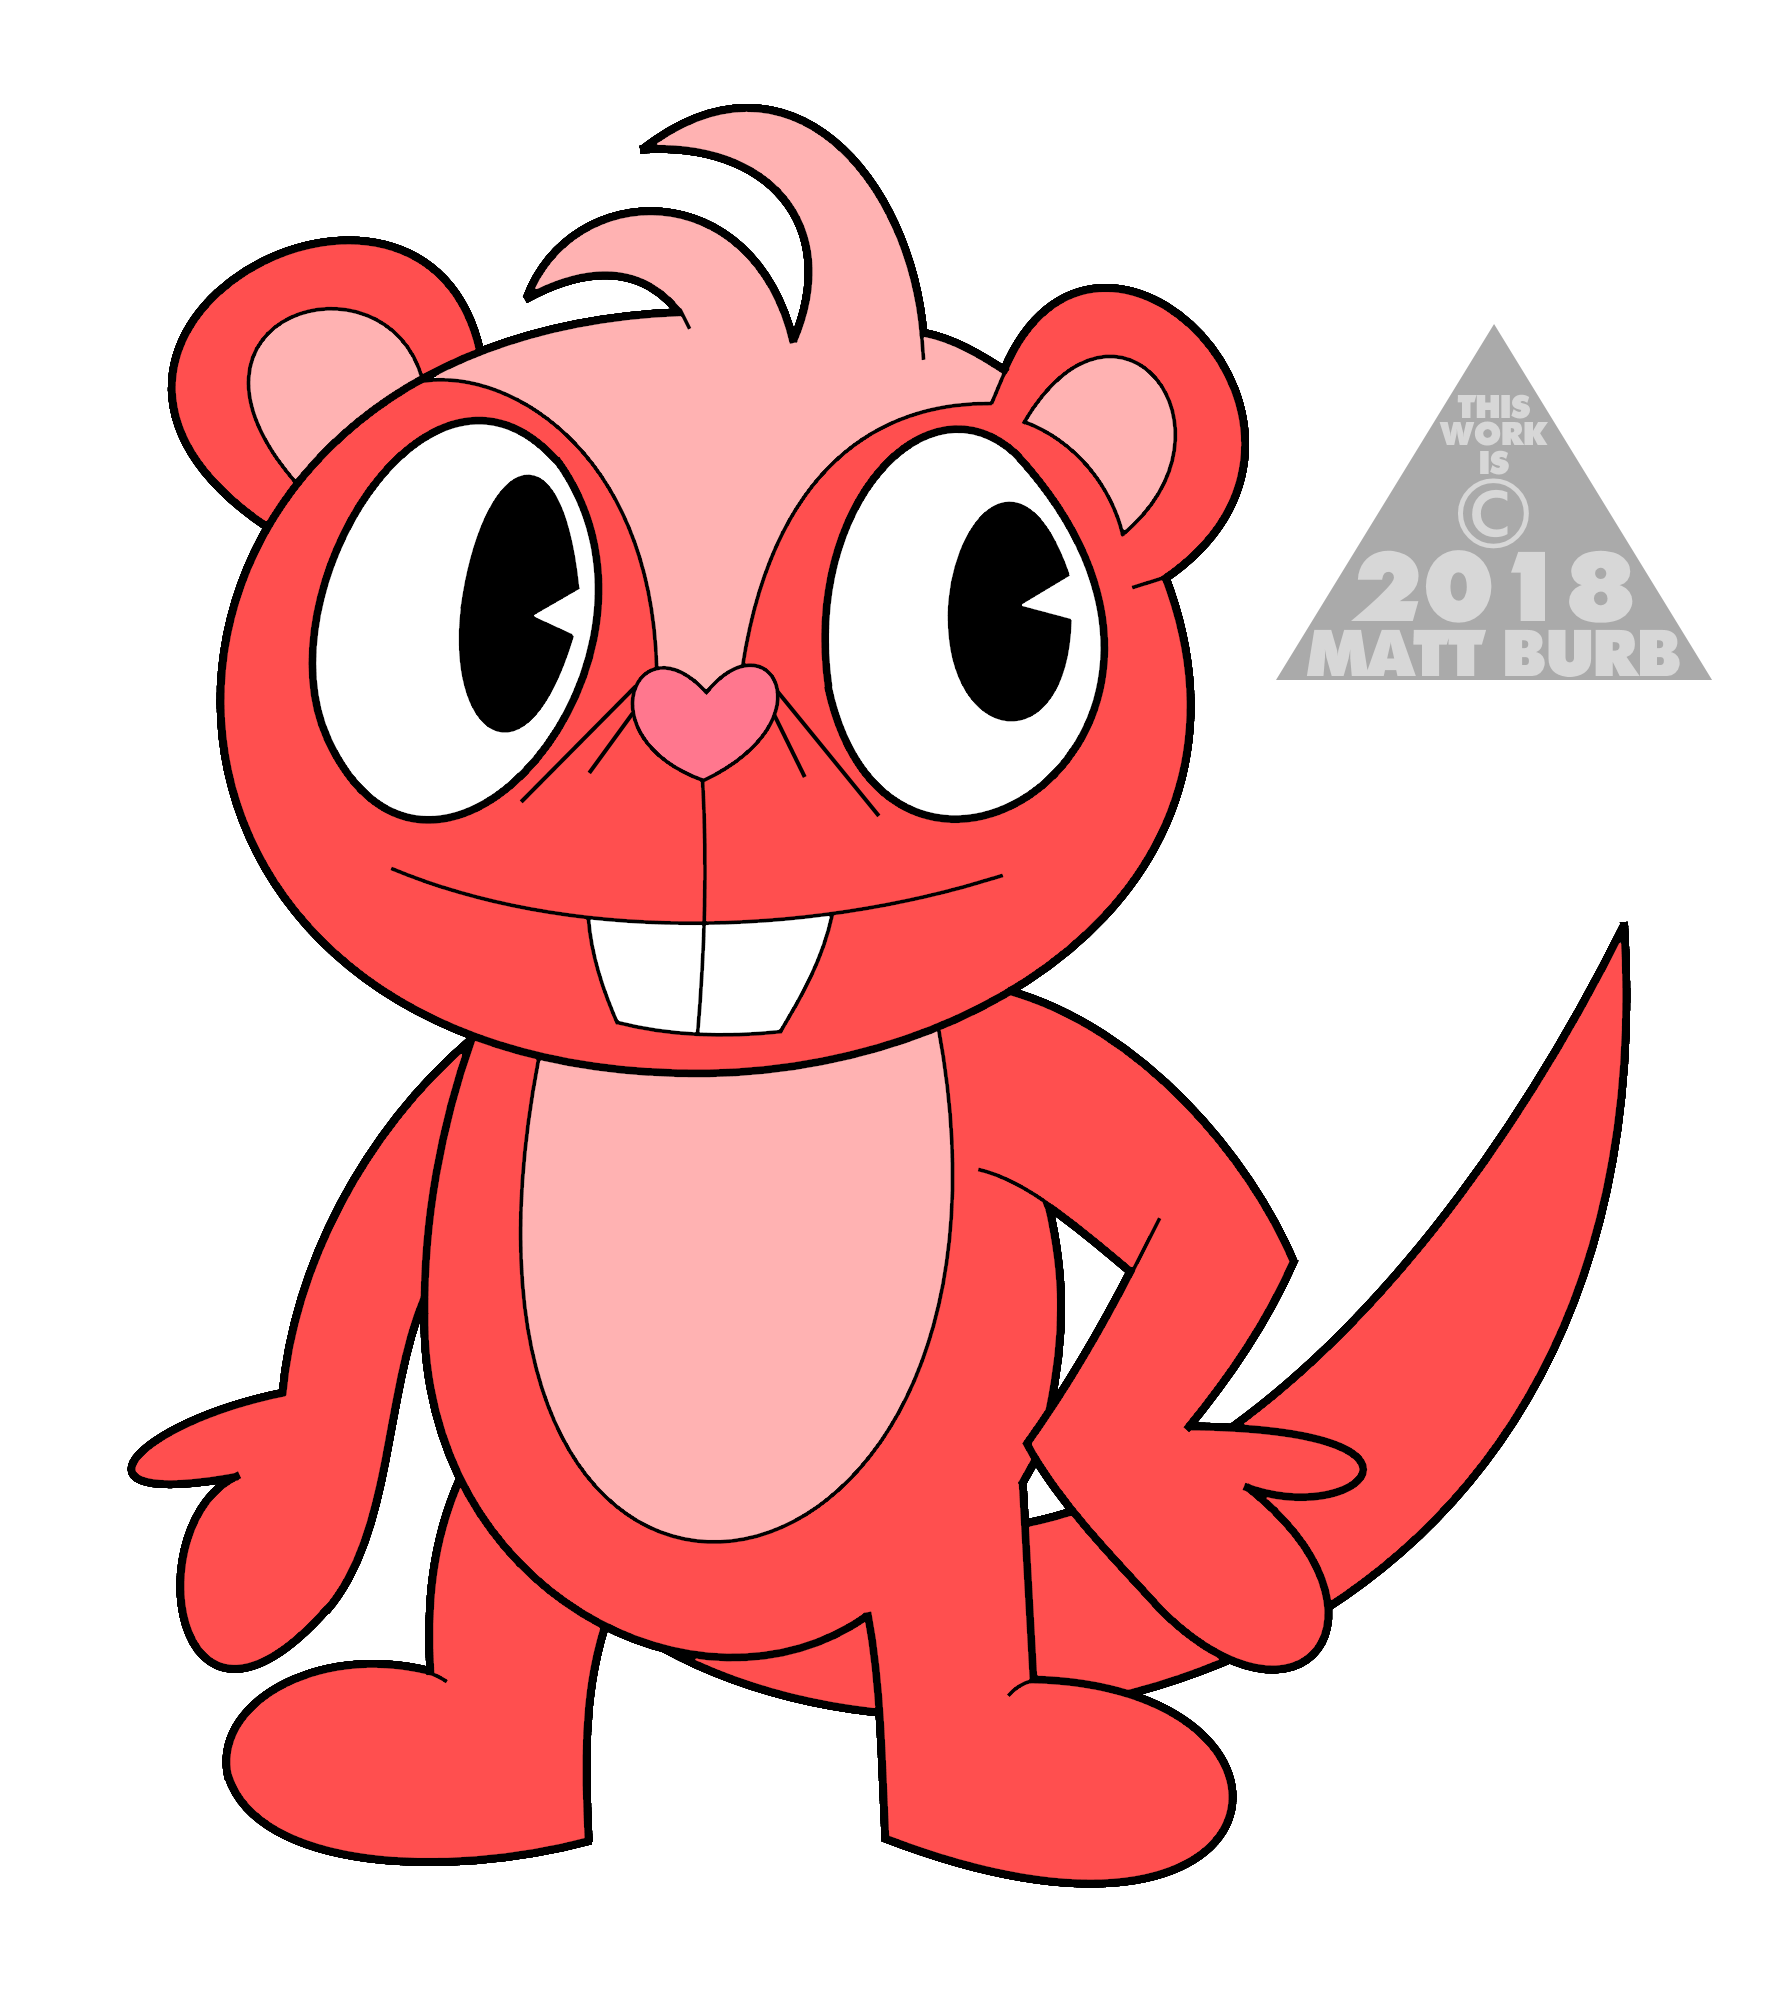 happy tree friends characters